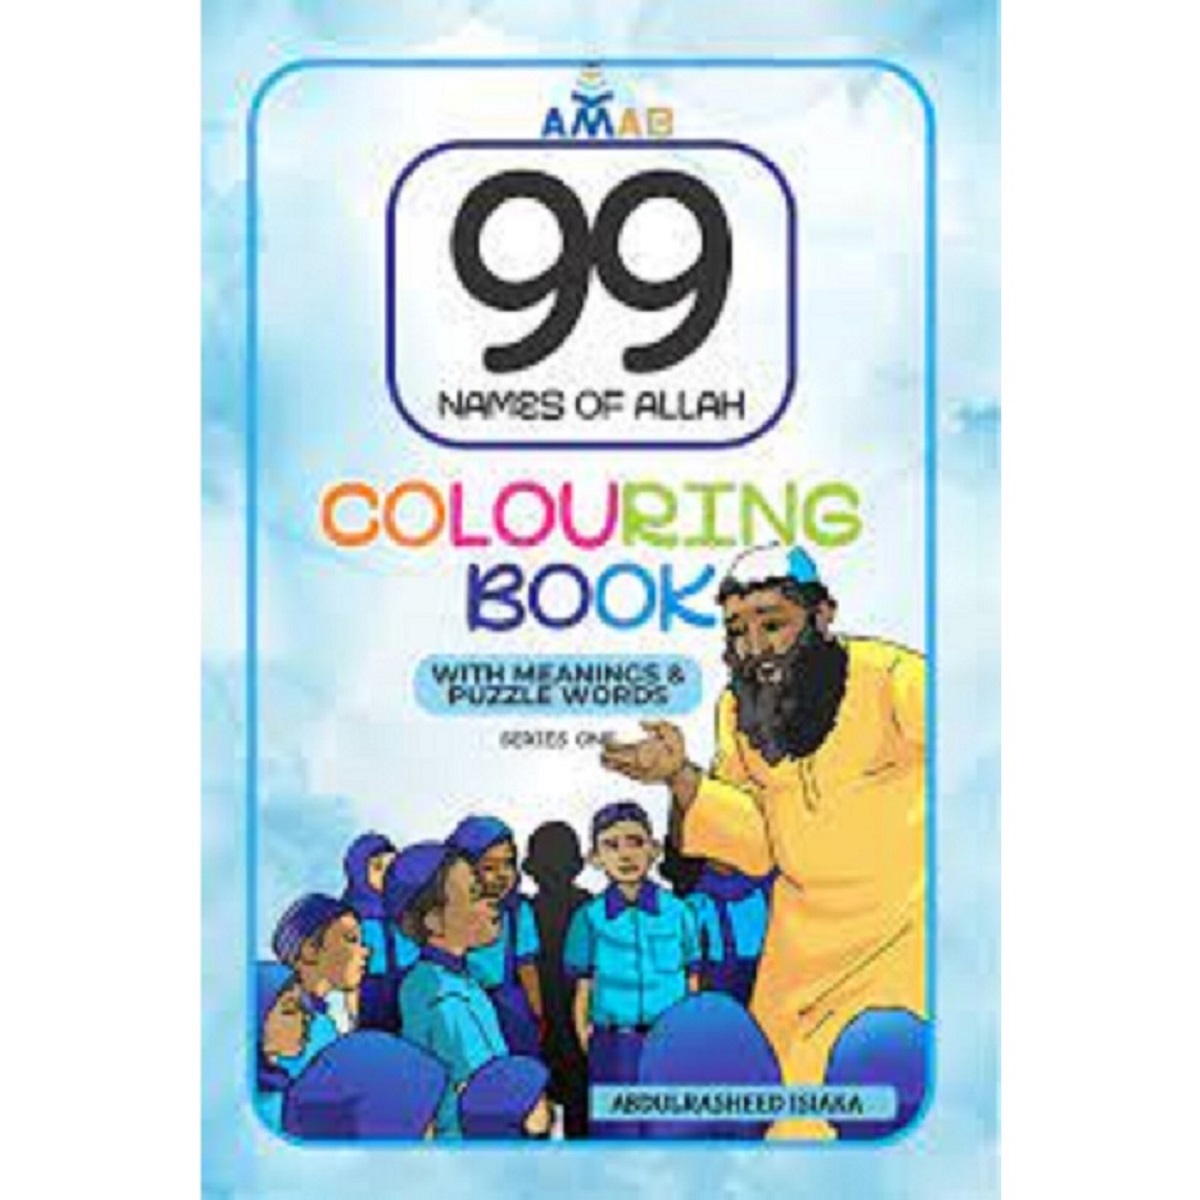 https://www.tarbiyahbooksplus.com/shop/islamic-books-and-products-for-children/99-names-of-allah-colouring-book/